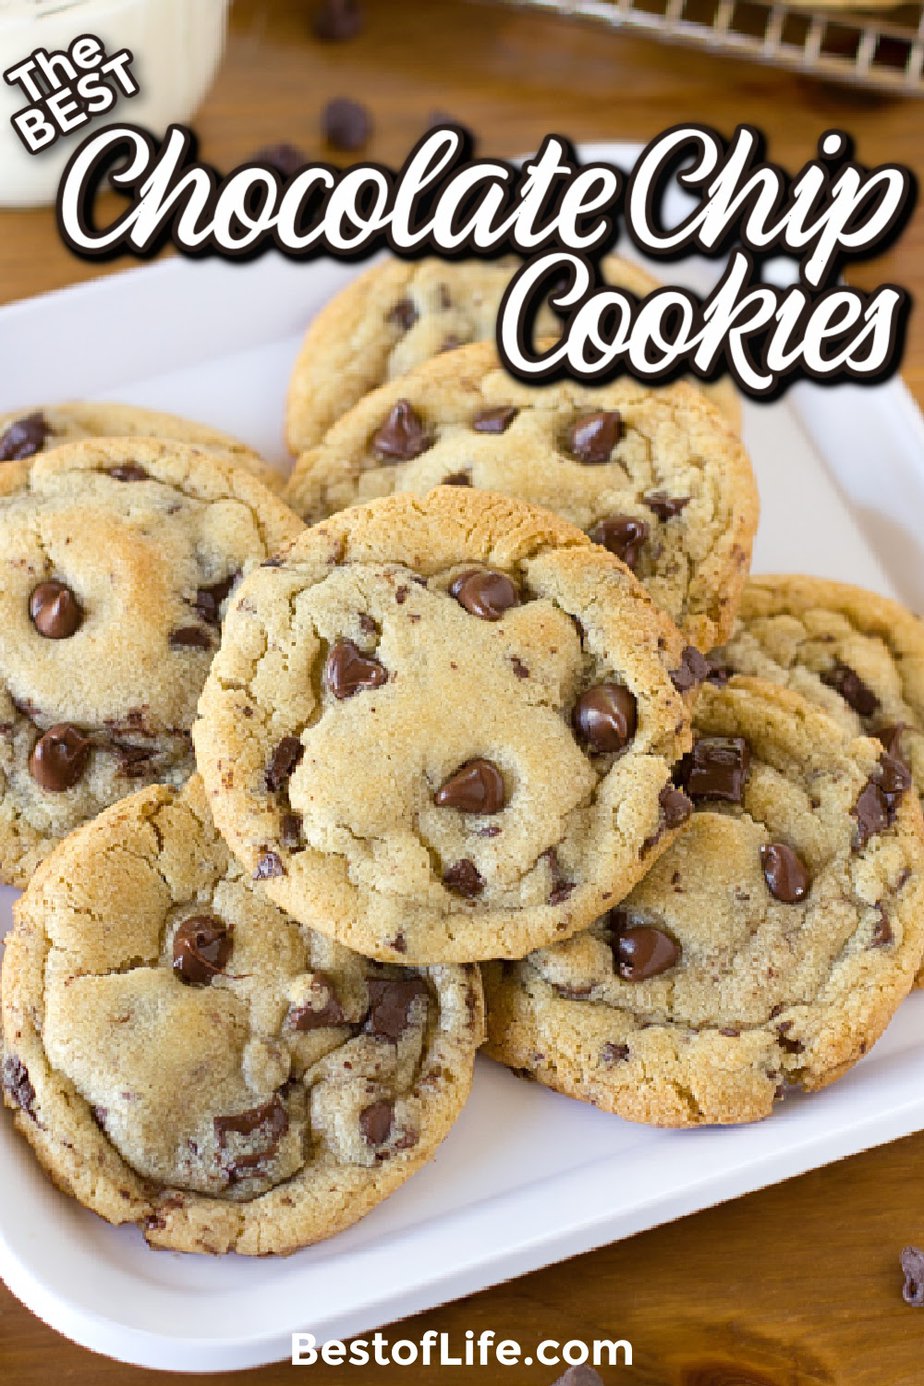 Finding the best chocolate chip cookie recipes can be fun! Here are some easy and delicious recipes that will make taste testing fun! Dessert Recipes | Easy Cookie Recipes | Best Cookie Recipes | Salted Caramel Chocolate Chip Cookies | How to Make Chocolate Chip Cookies from Scratch | Homemade Cookies Recipes | Party Snack Recipes | Party Dessert Recipes #cookierecipes #Desserts